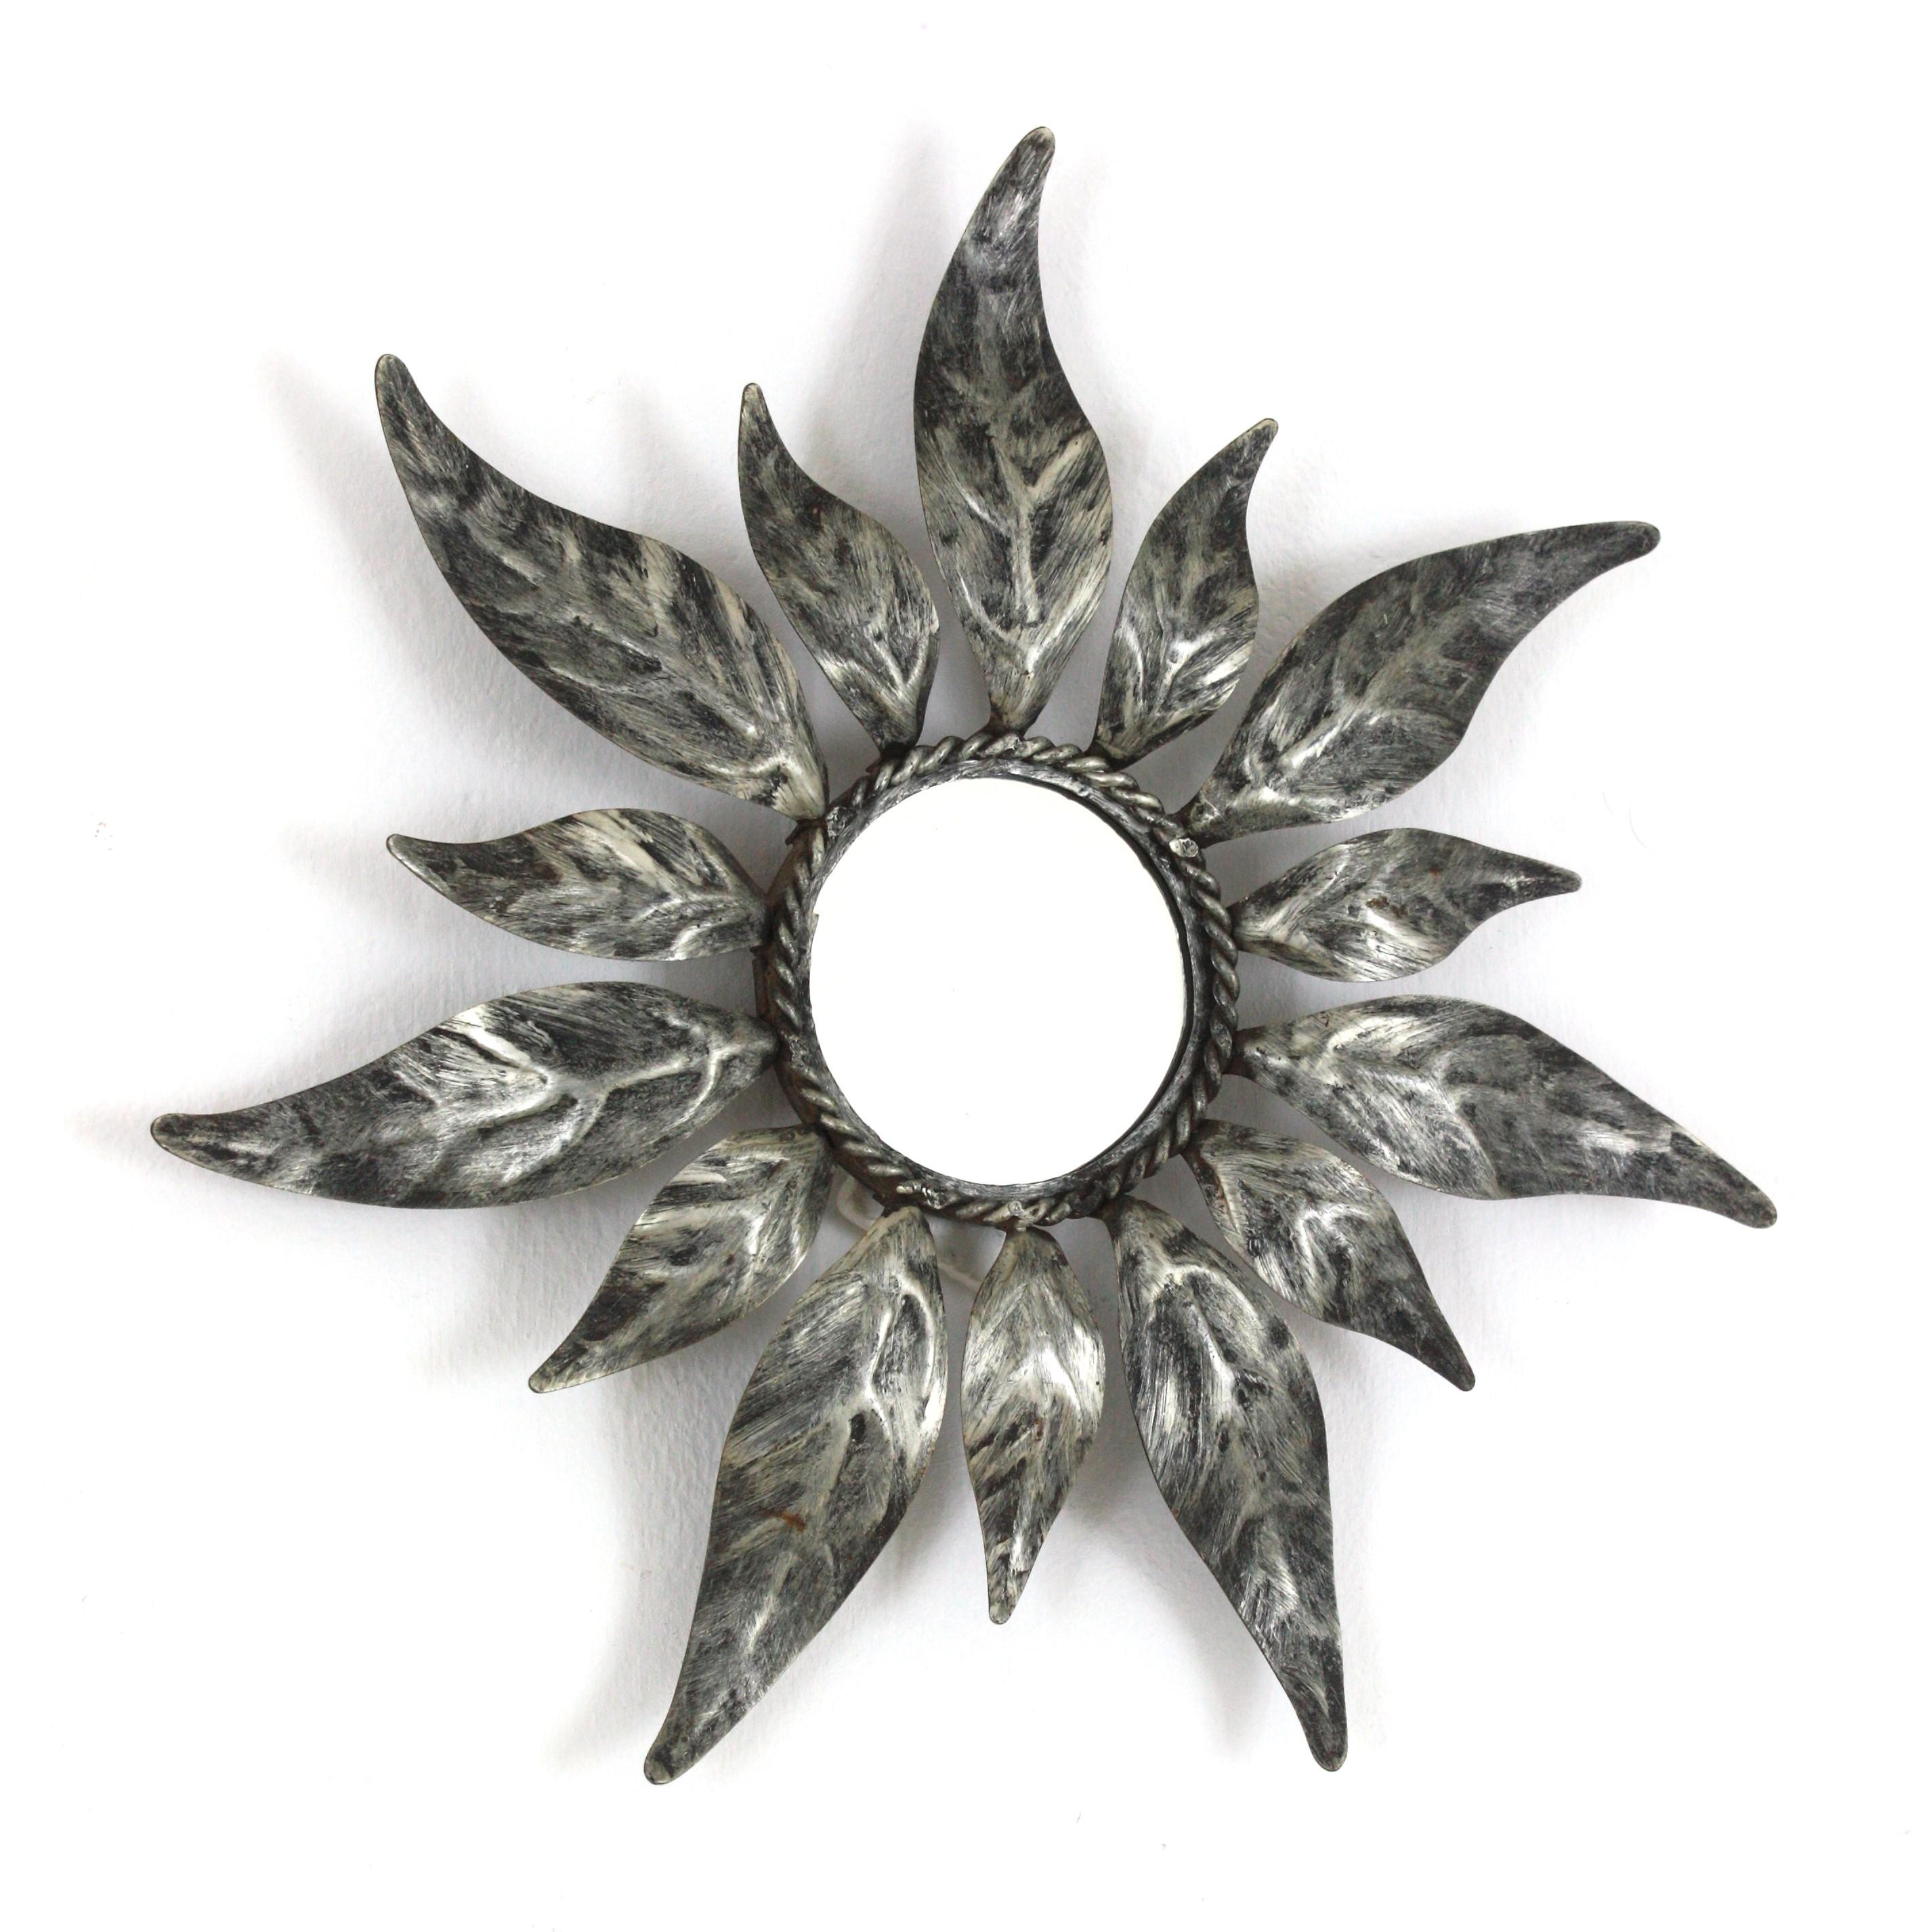 Spanish Mid-Century Modern Silvered Metal Leaf Design Mini Sized Sunburst Mirror. Spain, 1950s.
Lovely handcrafted gilt iron small scale sunburst mirror with alternating leaves in two sizes and  silver patinated iron.
Unusual piece due to its small